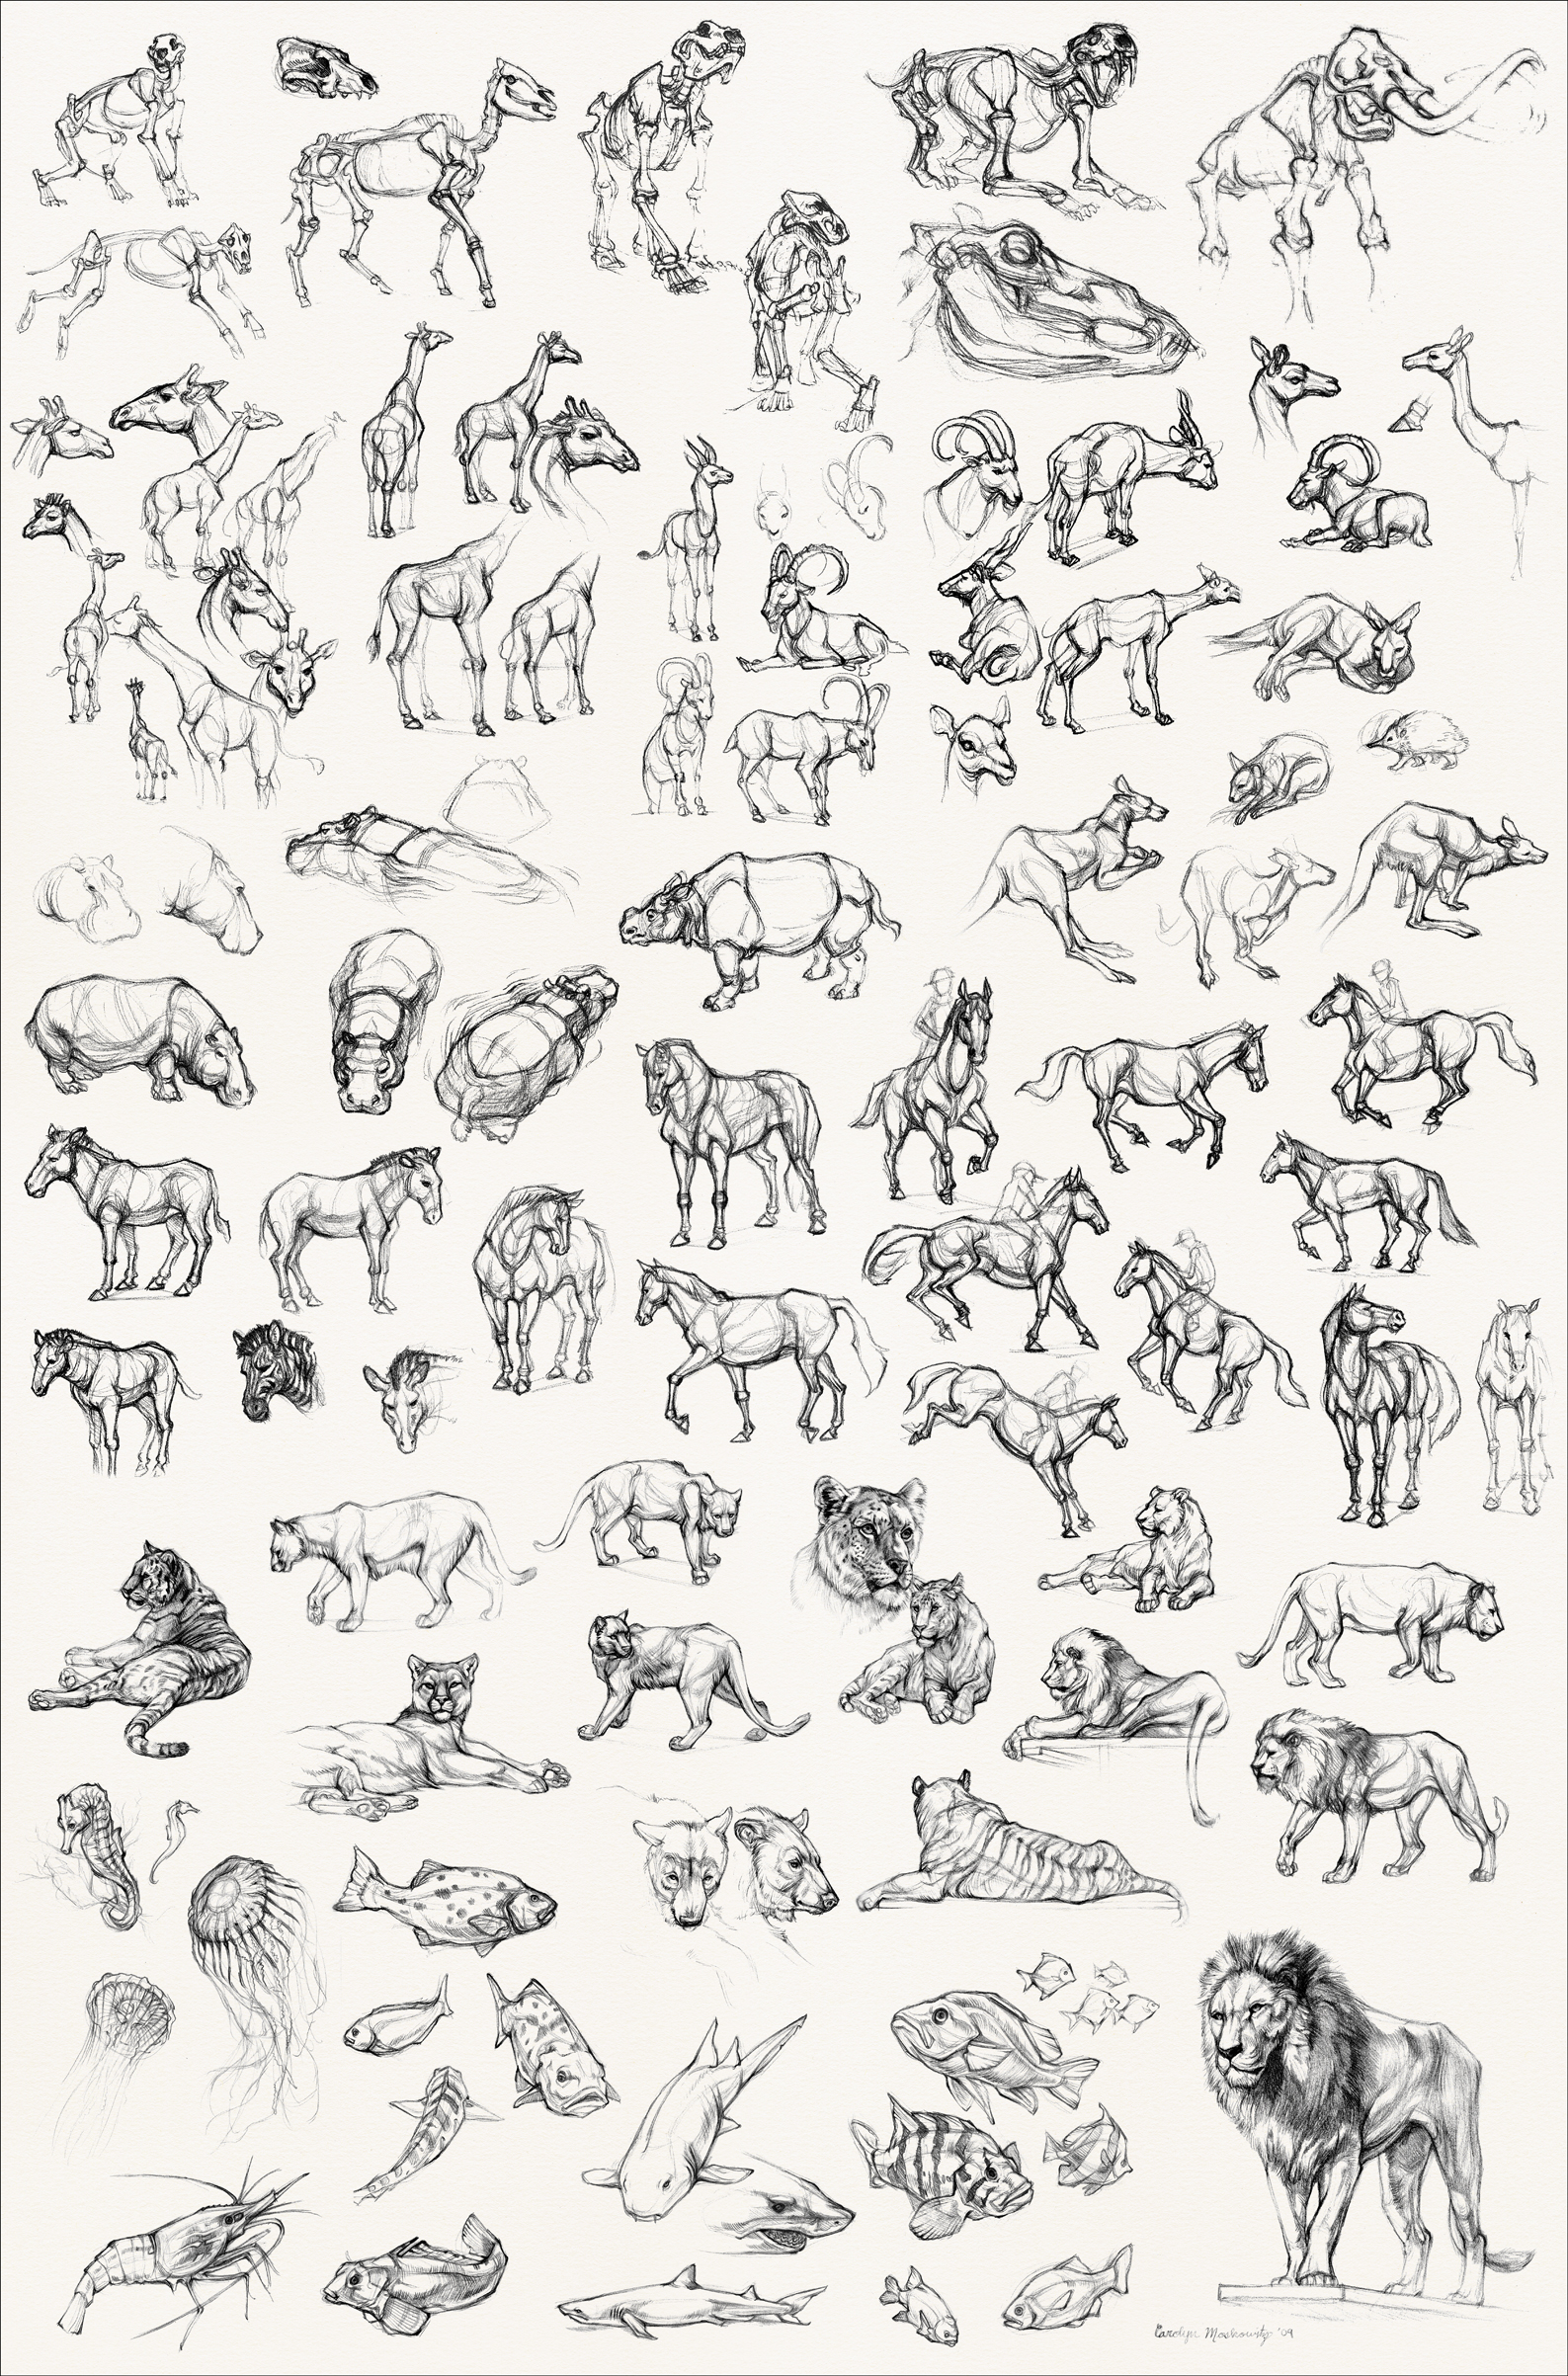 Animal Sketches 2 by Altalamatox on Clipart library